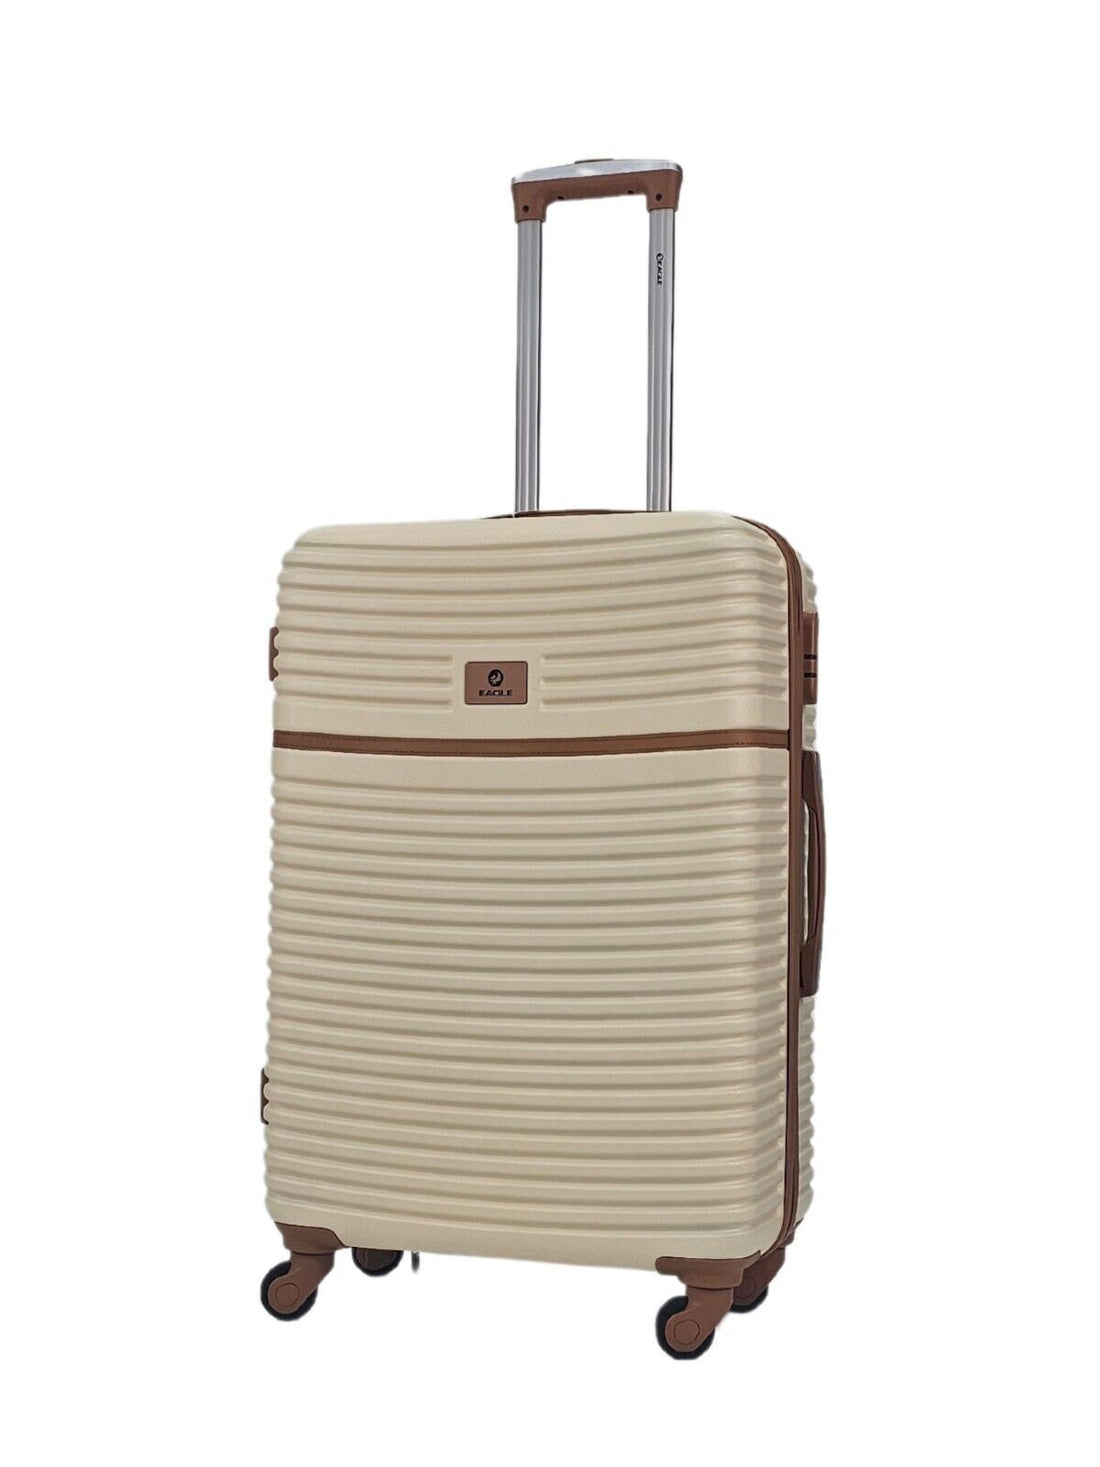 Hardshell Cabin Beige Suitcase Set Robust 4 Wheel ABS Luggage Travel Bag - Upperclass Fashions 